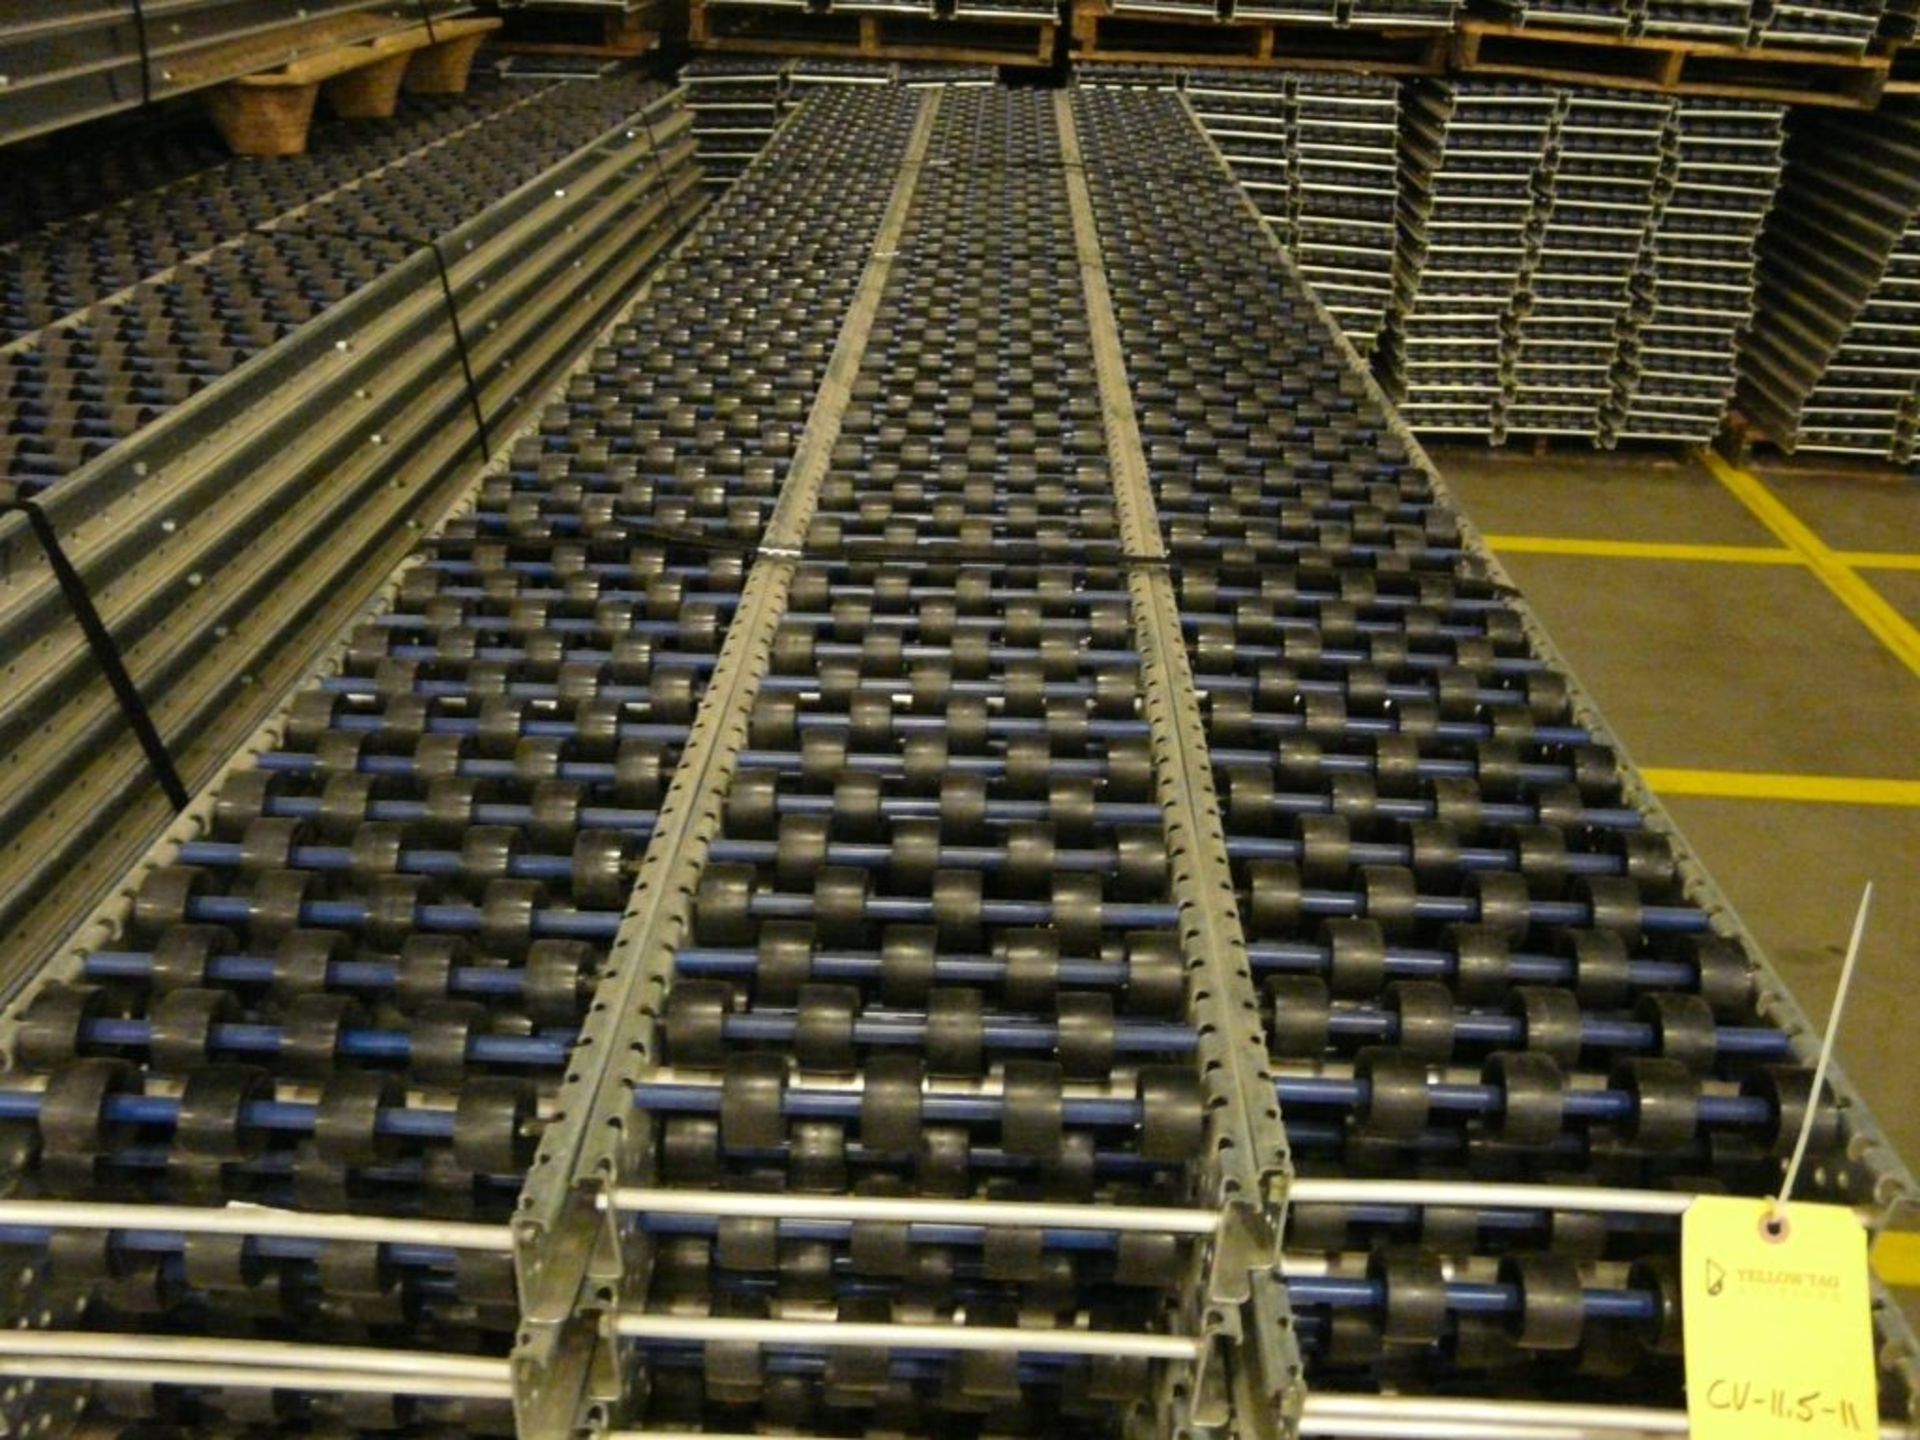 Lot of (90) SpanTrack Wheelbed Carton Flow Conveyors - 11.5'L x 11"W; Tag: 223565 - $30 Lot - Image 3 of 4